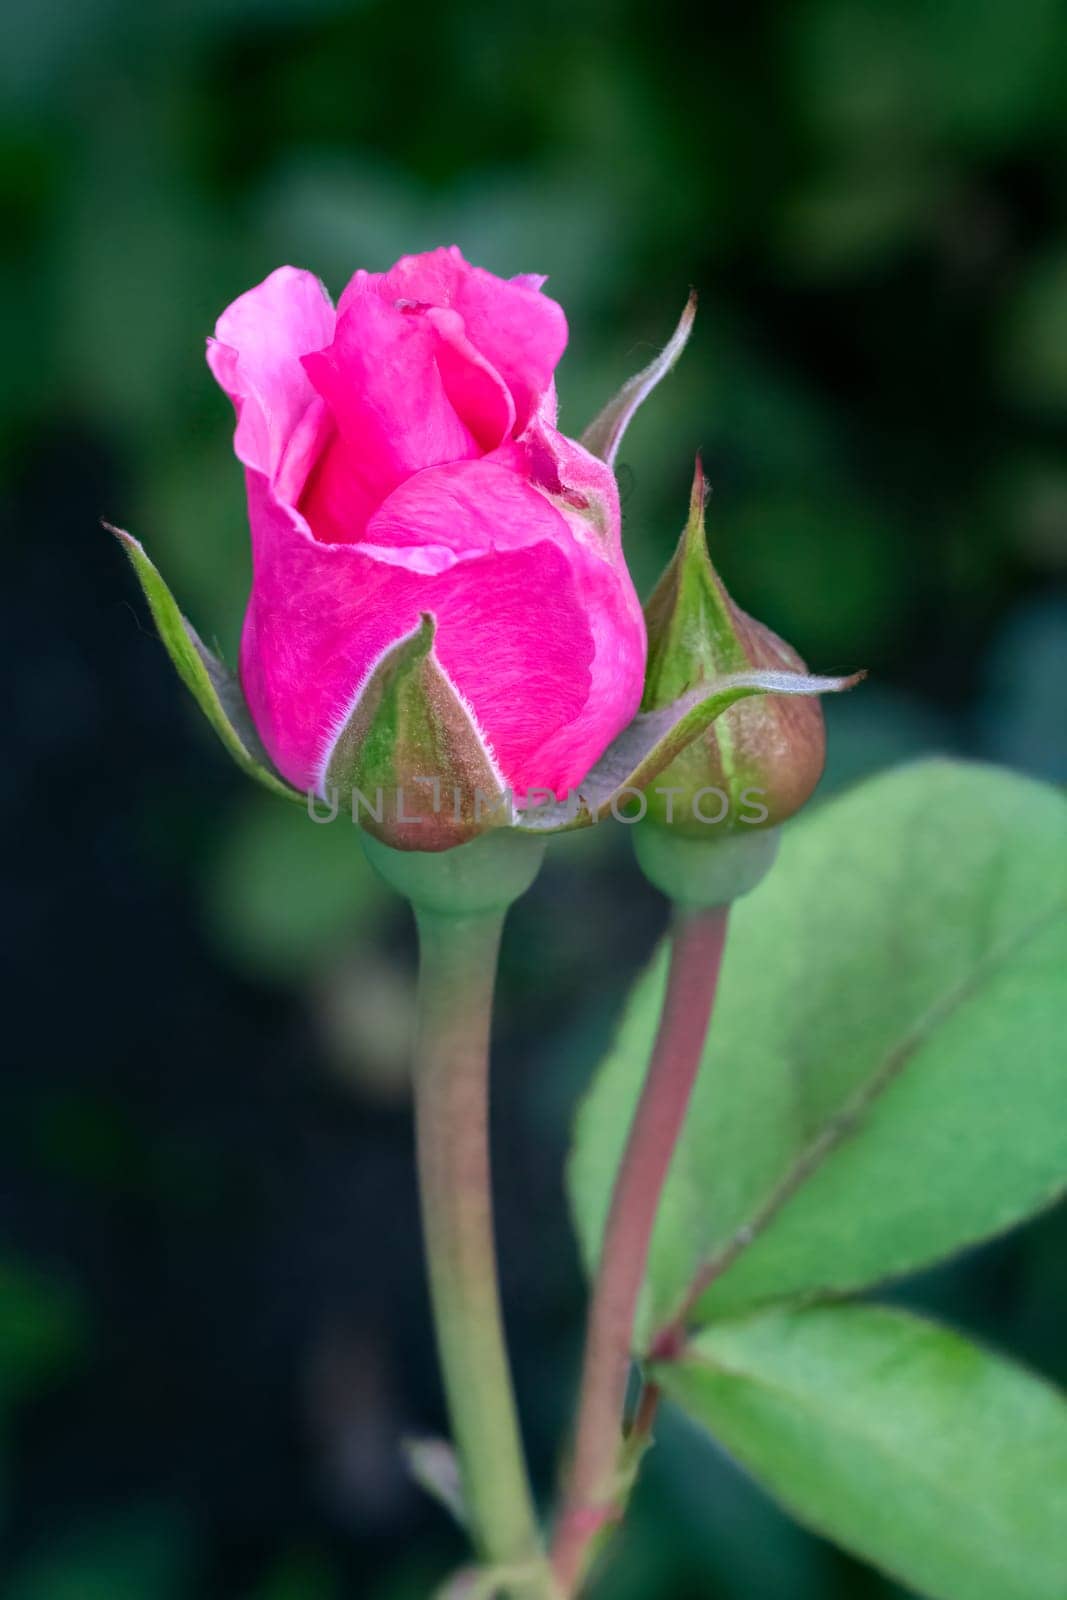 Rose bud on a stem with a garden on the background. by mvg6894